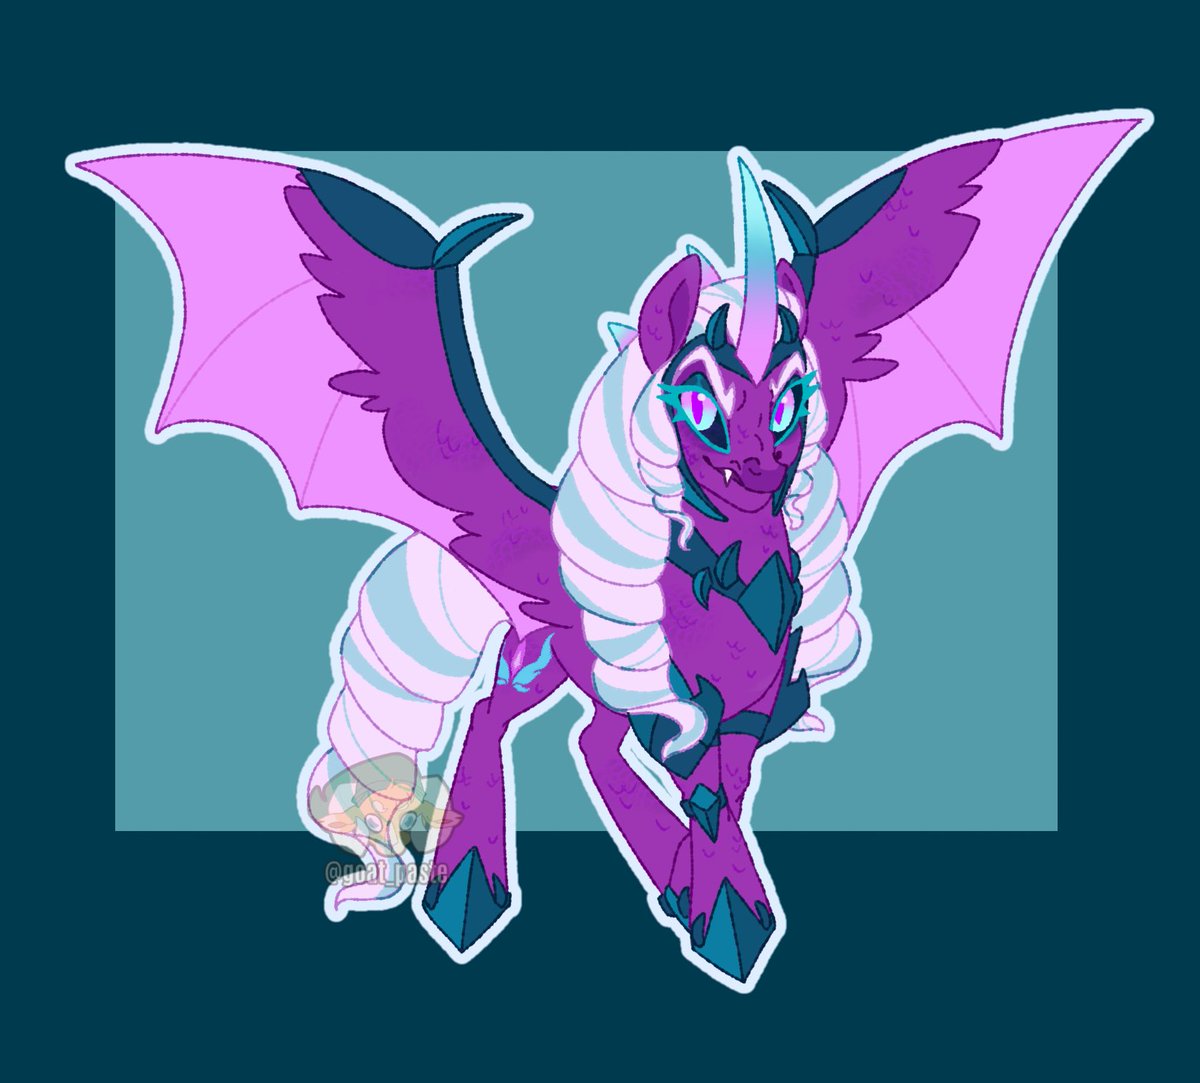 i couldve done better but anyway: opaline if she was corrupted by the dragon fire she absorbed, I tried to reference all sorts of mlp villains in the design but I feel like it’s a bit much #MLP #mylittlepony #g5 #makeyourmark #tellyourtale #pony #opaline